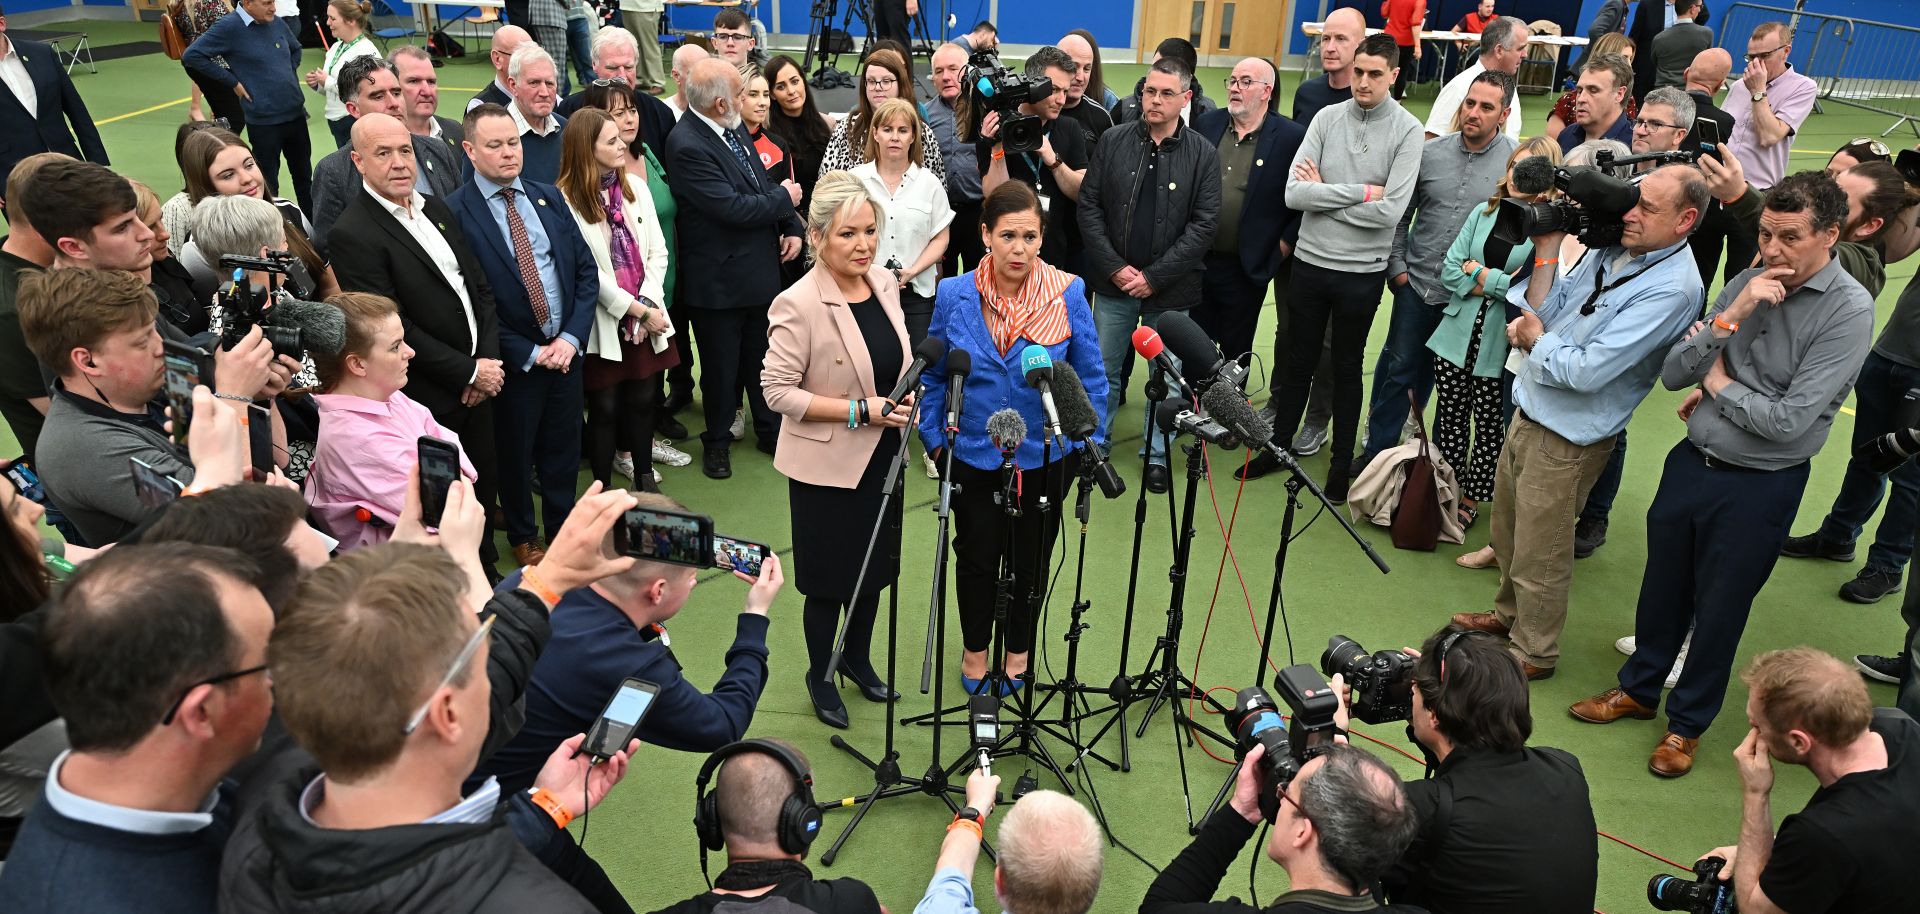 Michelle O'Neill (center, left) and Mary Lou McDonald -- the vice president and president, respectively, of the Irish political party Sinn Fein -- speak to reporters on May 07, 2022, after the results of Northern Ireland's legislative election were announced.